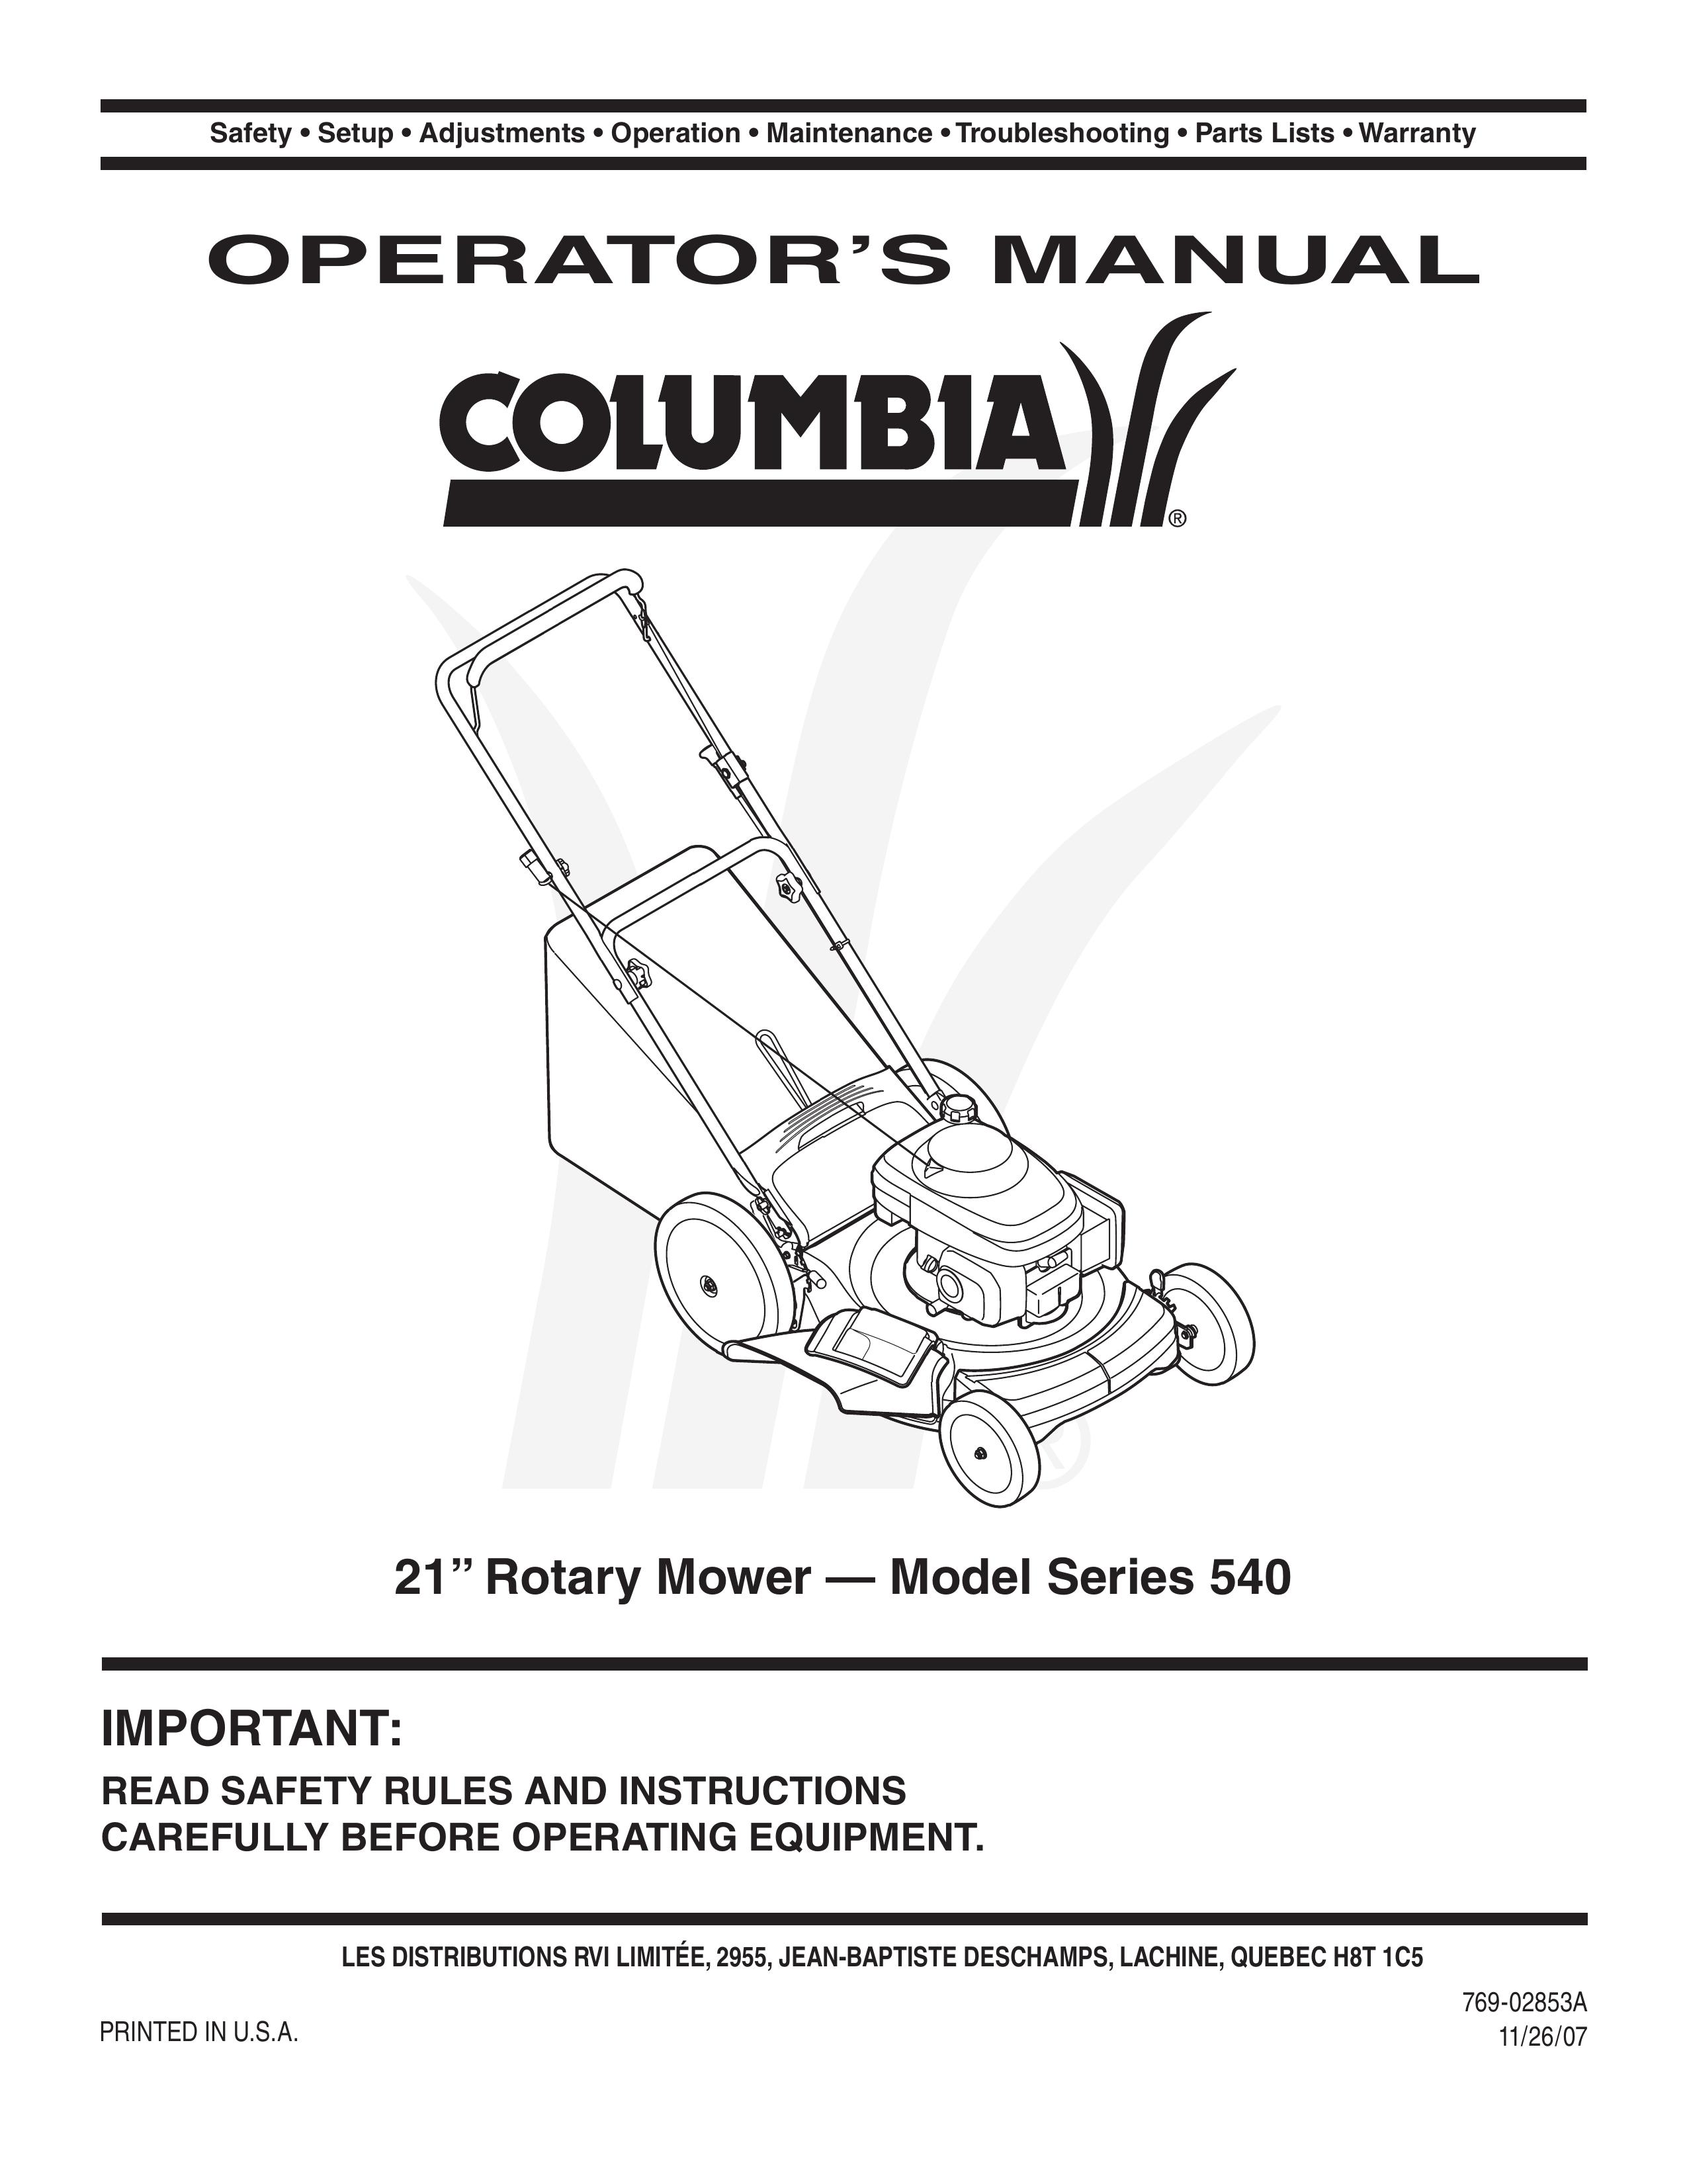 Columbian Home Products 540 Lawn Mower User Manual